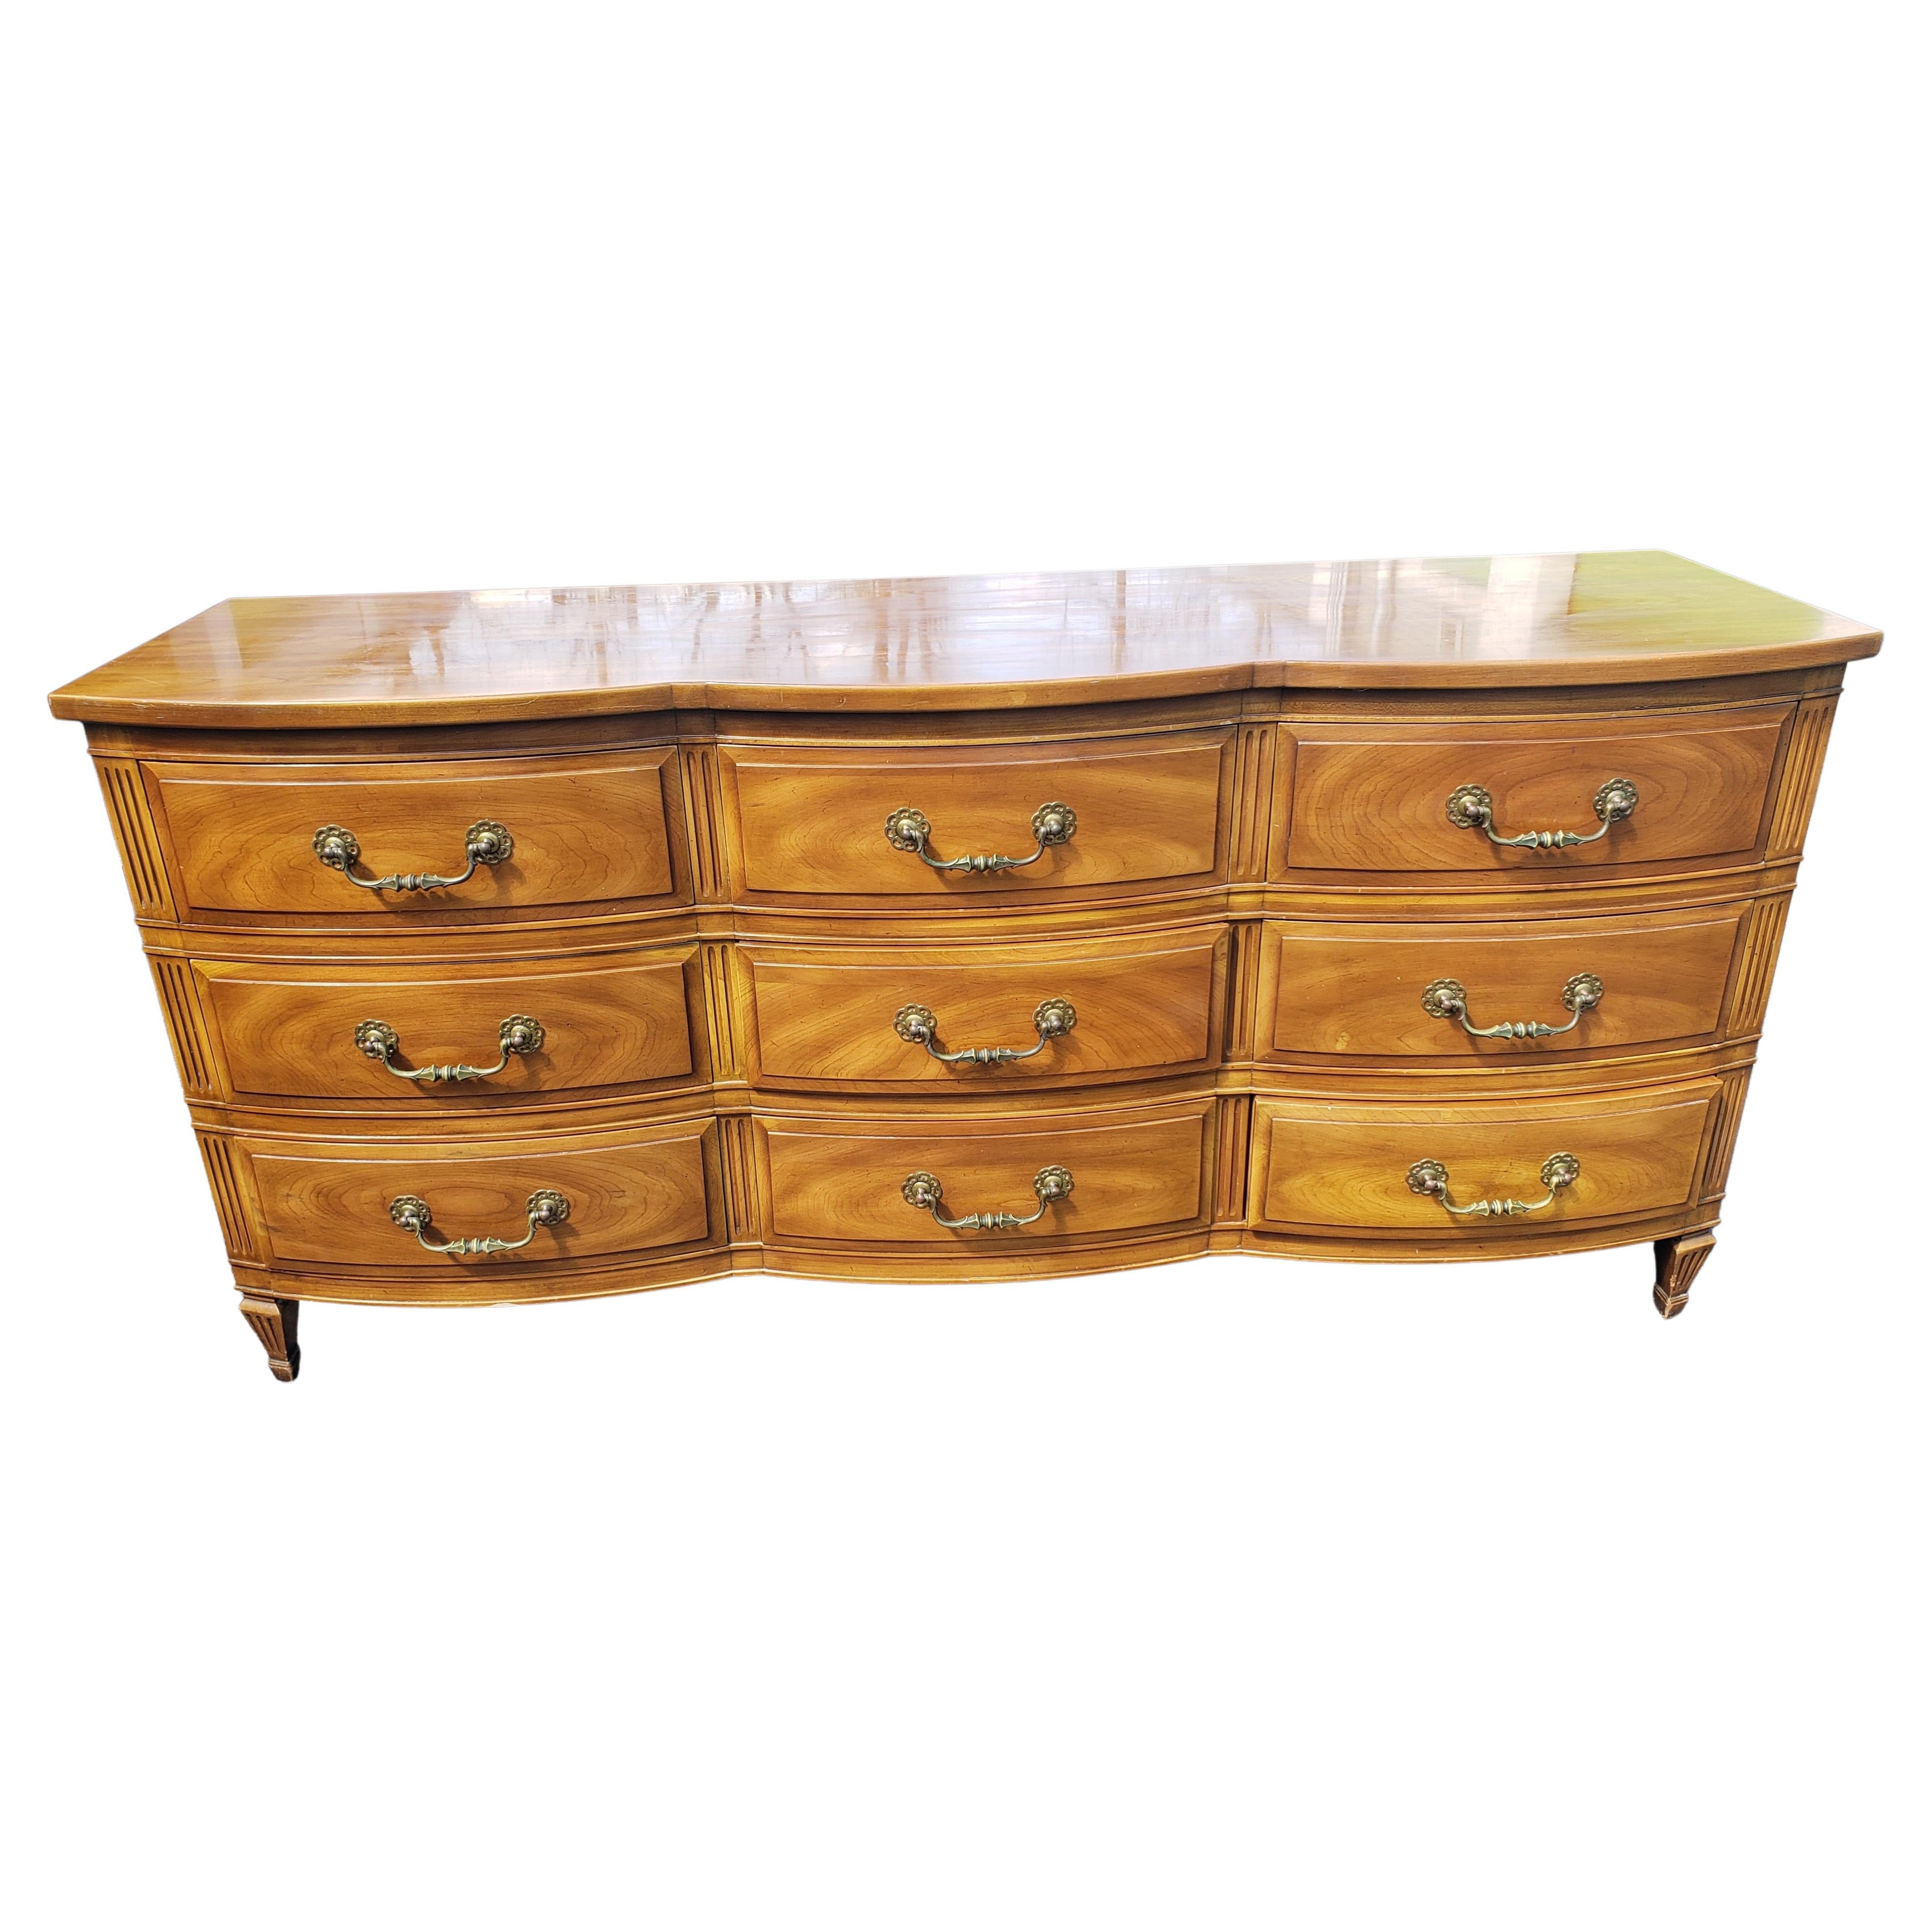 Fruitwood John Widdicomb French Country Serpentine Dresser with Glass Top, circa 1950s For Sale